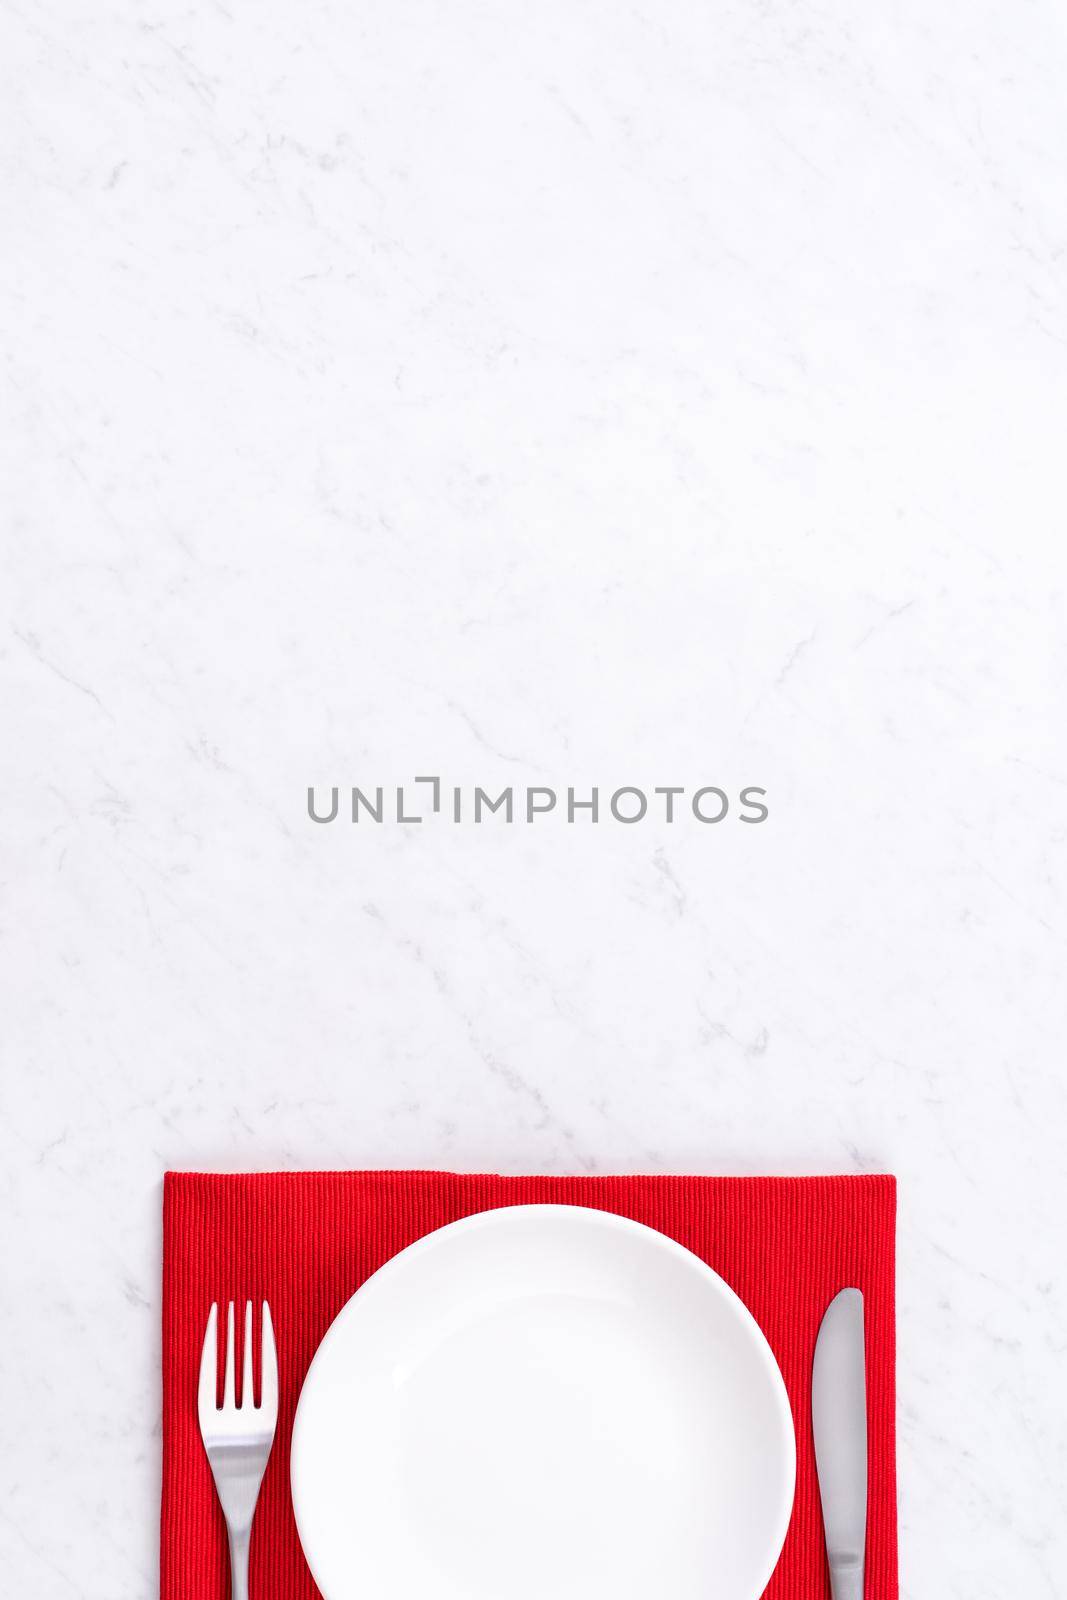 Valentine's Day, Mother's Day, holiday dating meal, banquet design concept - White plate and red ribbon on marble background, top view, flat lay. by ROMIXIMAGE